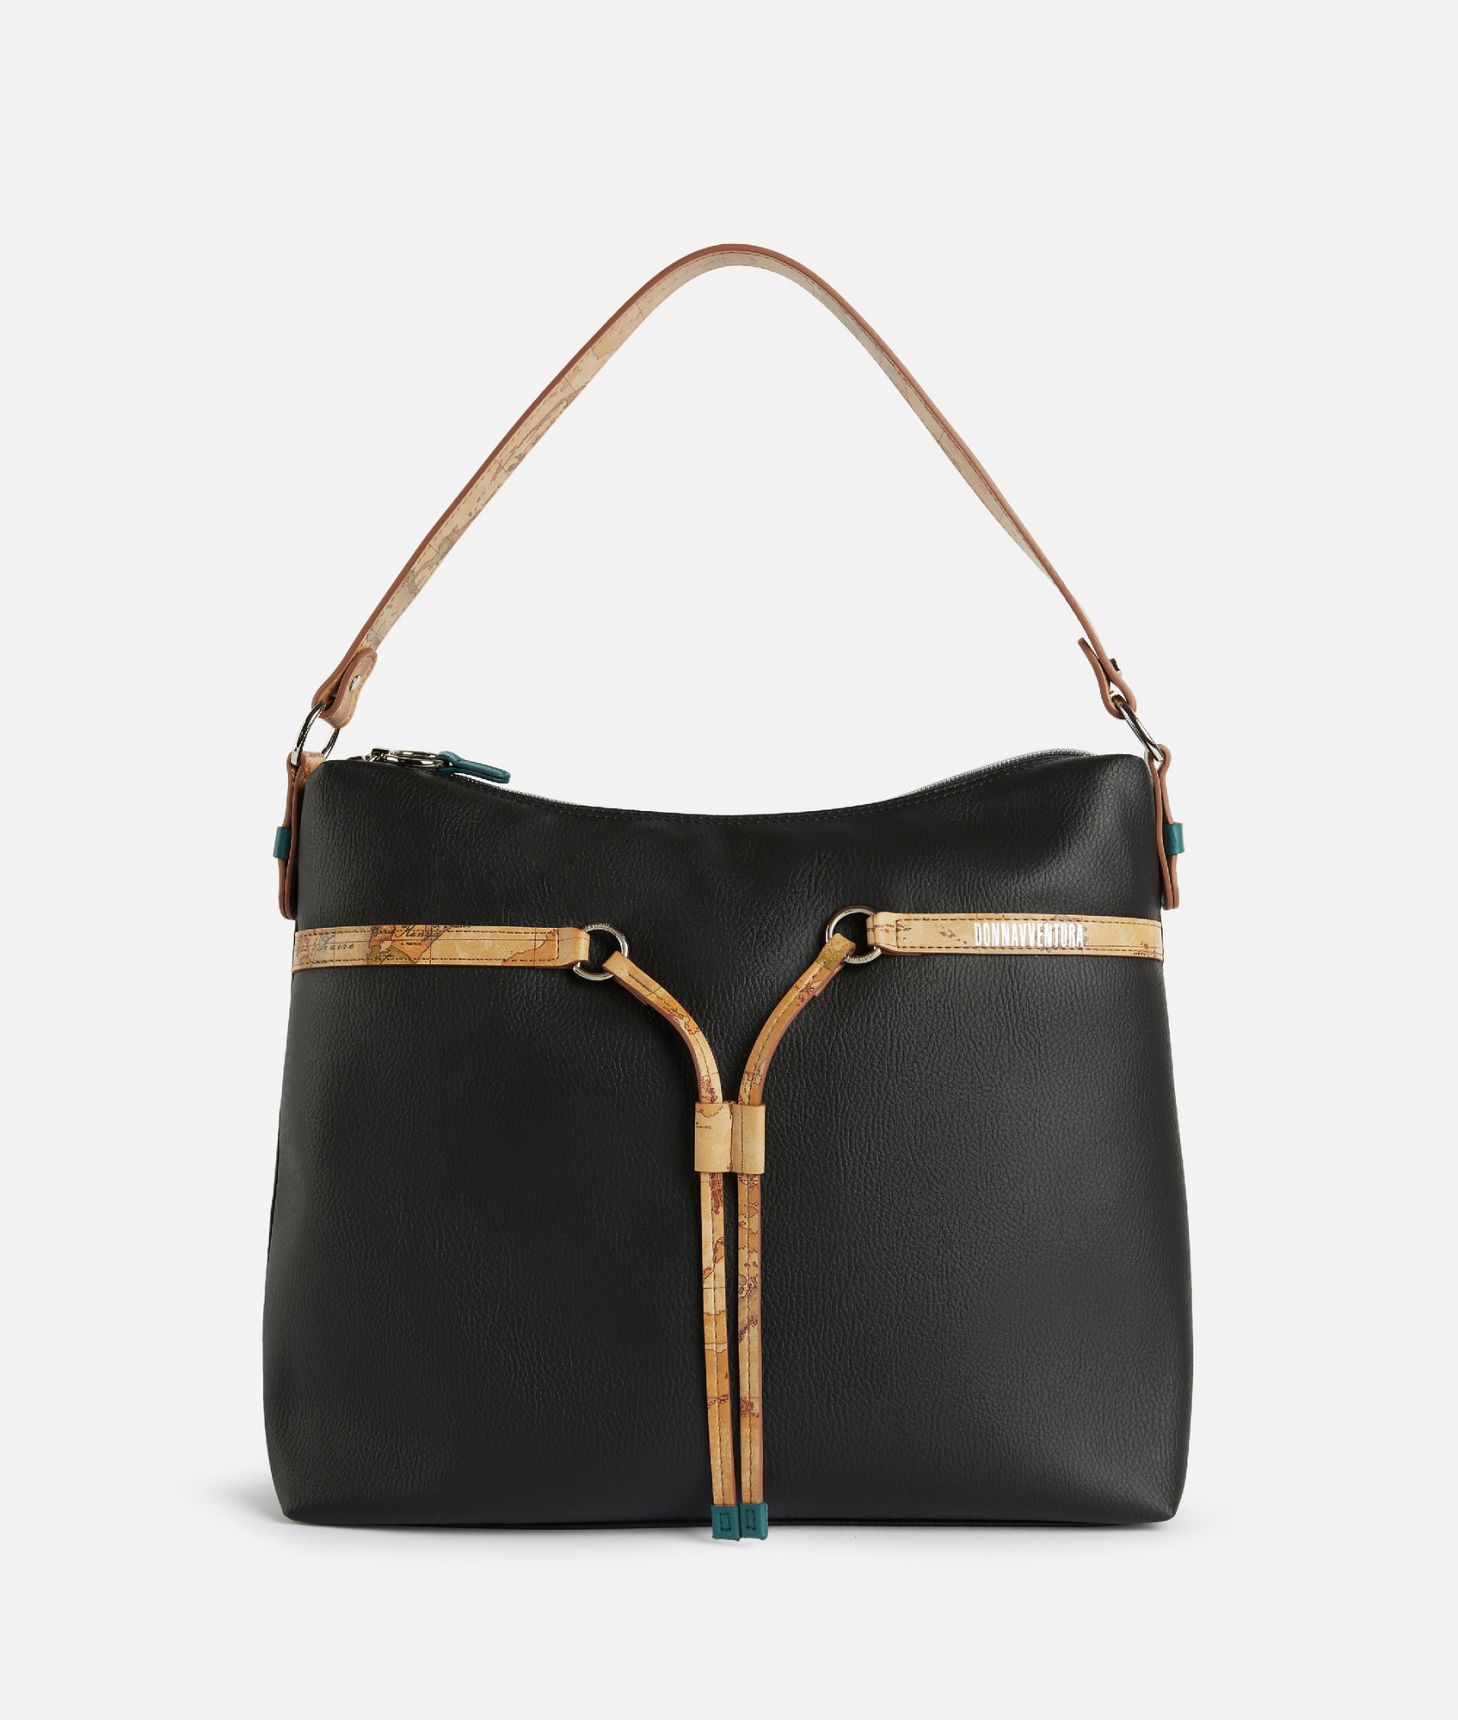 Underarm bag in grainy faux leather Black,front